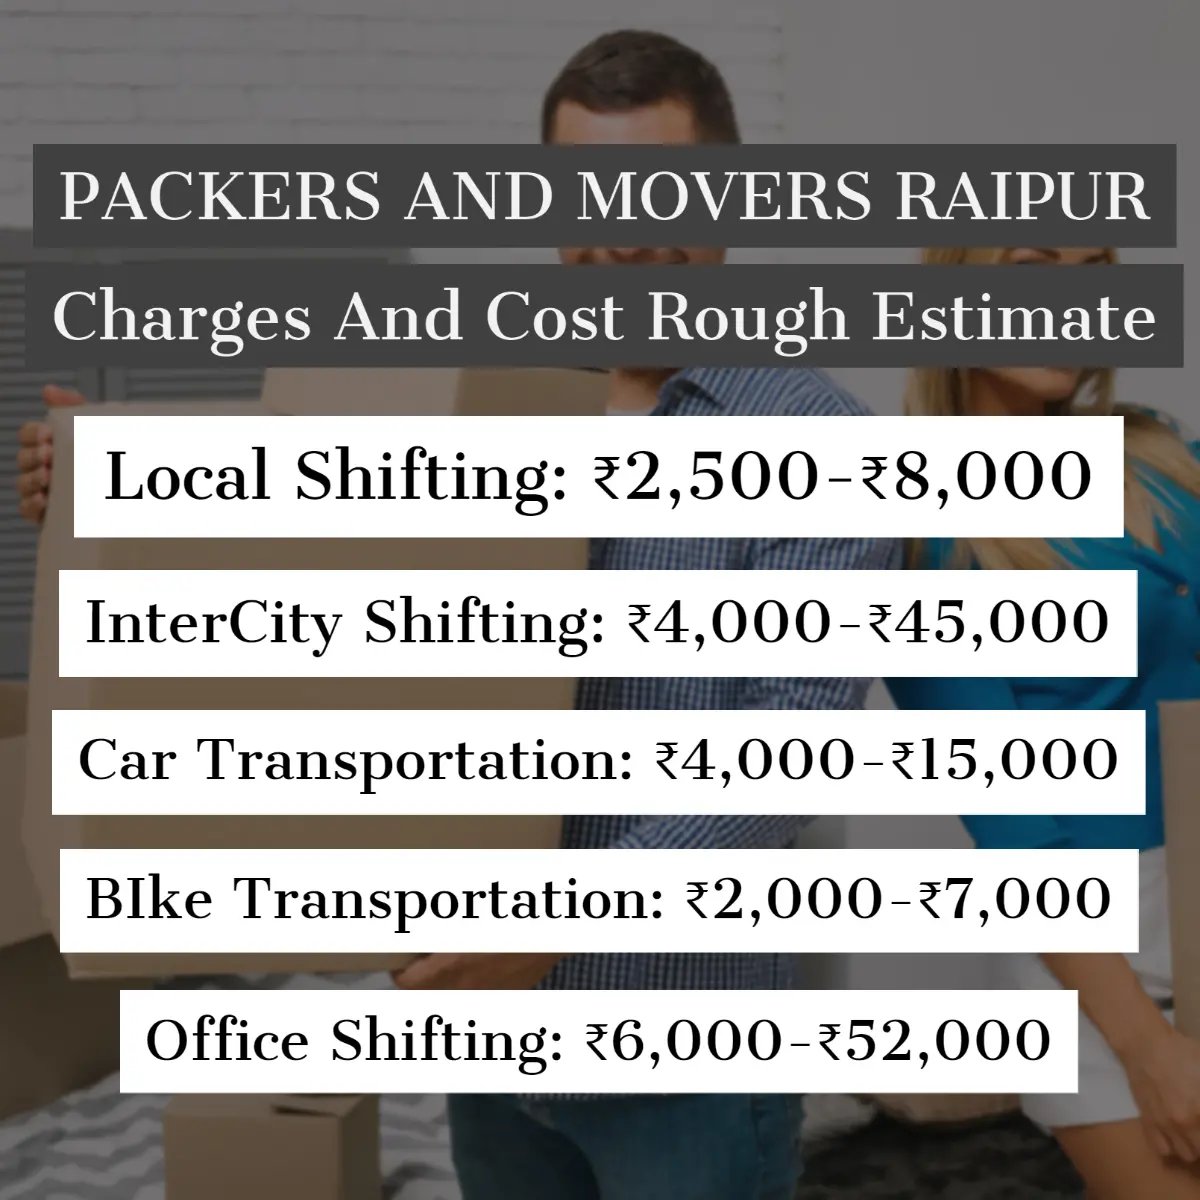 Packers and Movers Raipur Charges